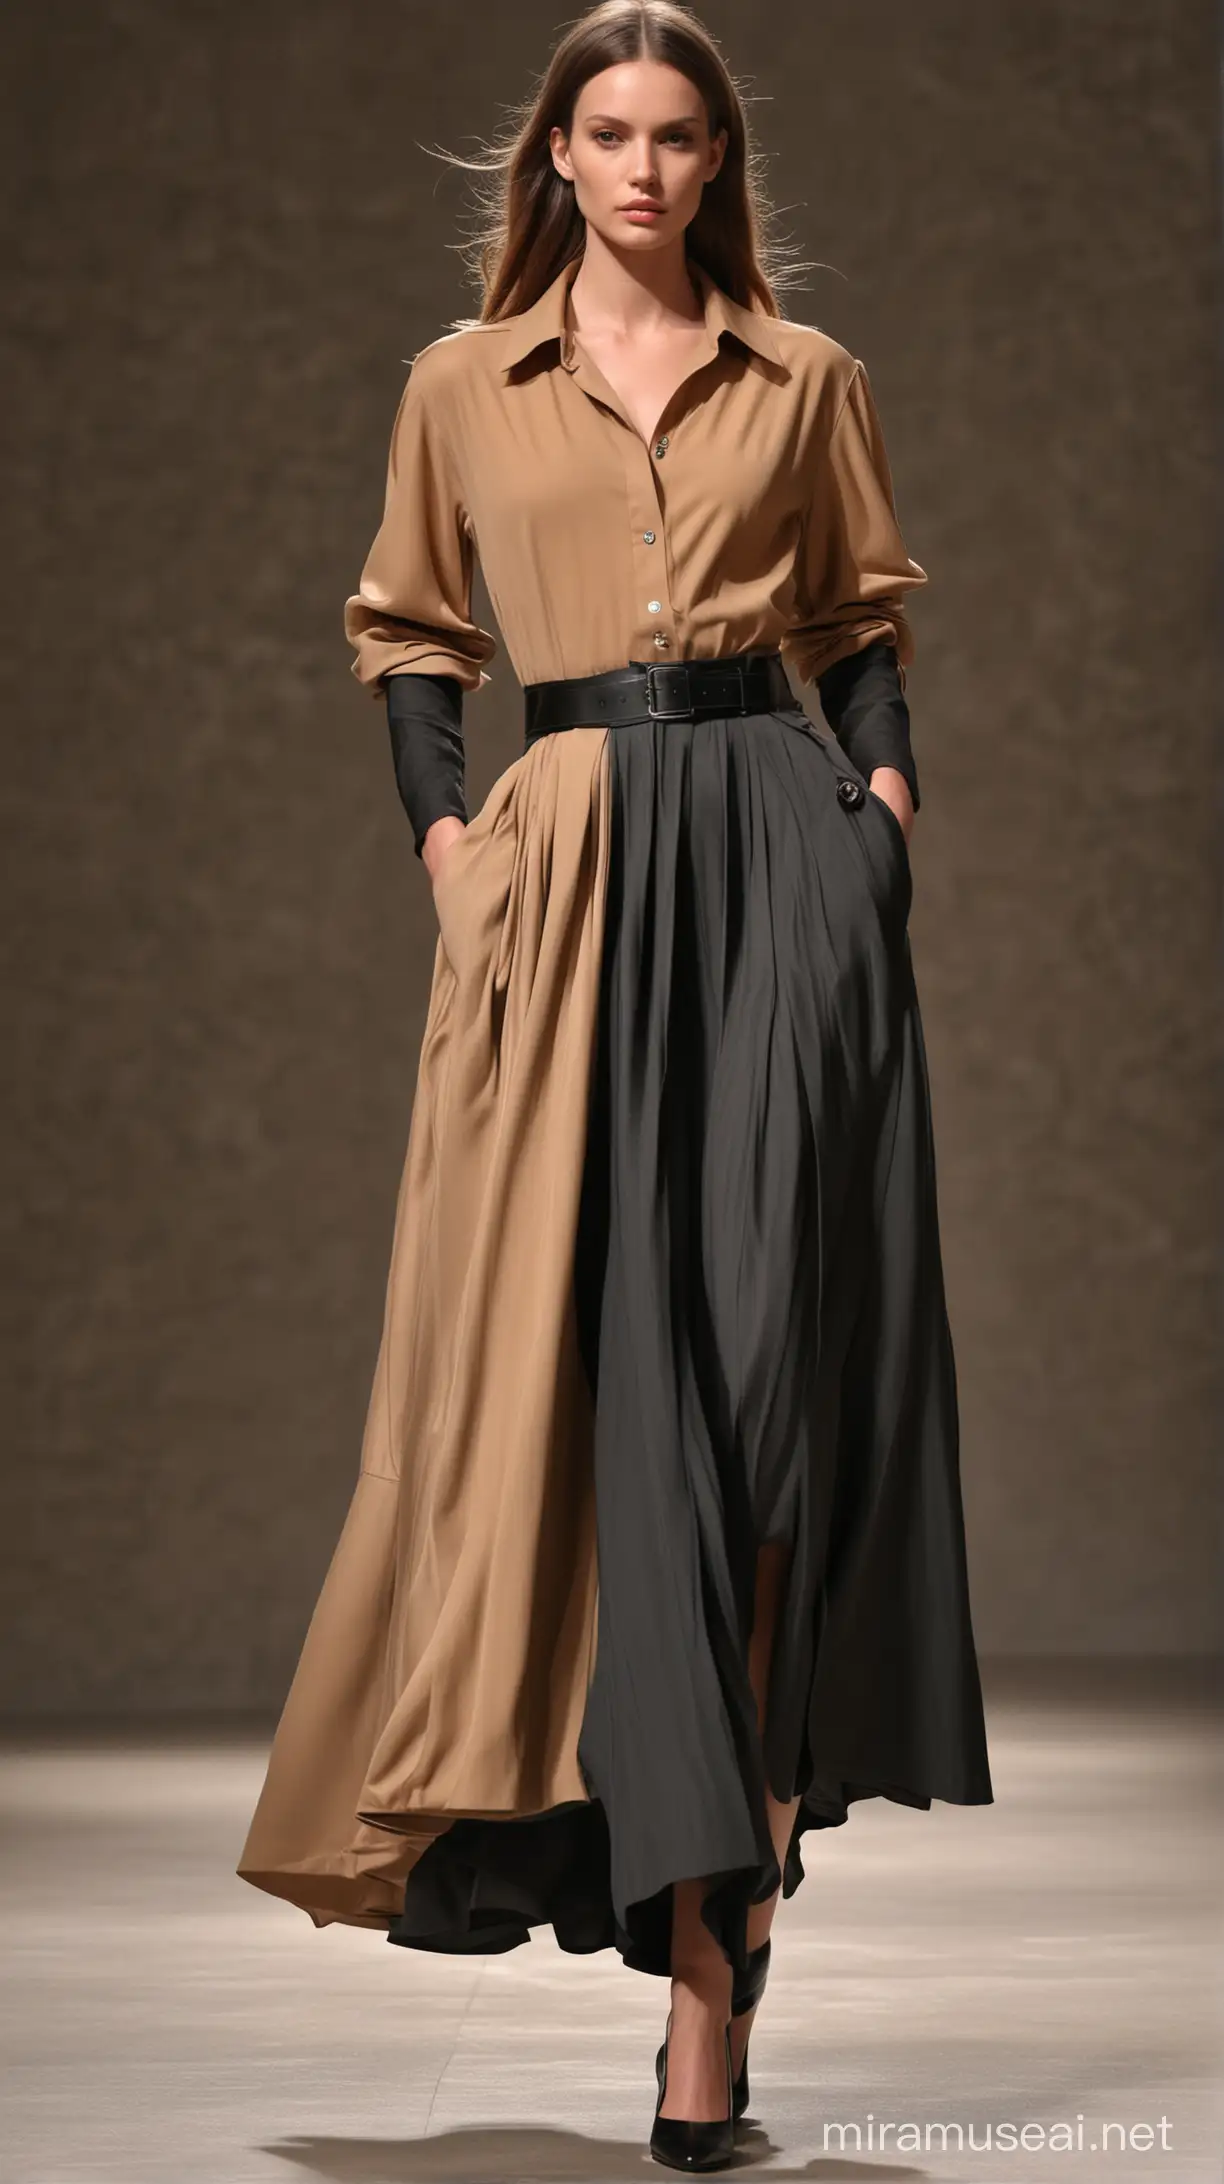 Stunning supermodel runway motion for Montelago brand, front angle, wearing  dress, very long flowy, 2 colors(camel and black charcoal) cupro fabric skirt, hands in the pockets , hyper-realistic, Alexander McQueen style